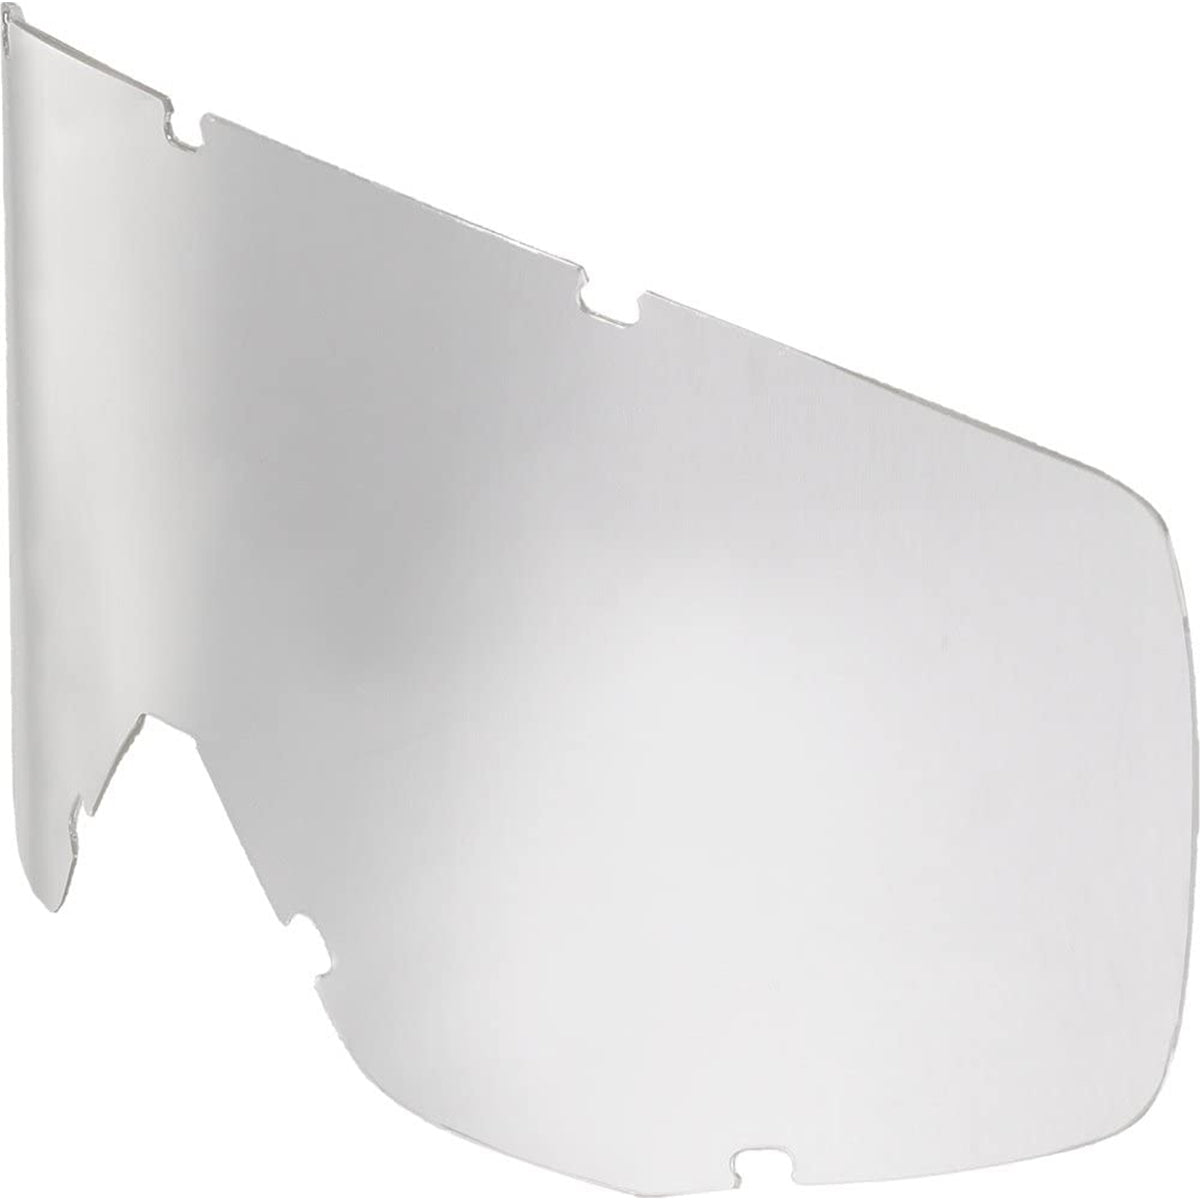 Scott 89SI Thermal ACS Replacement Lens Goggles Accessories-220516